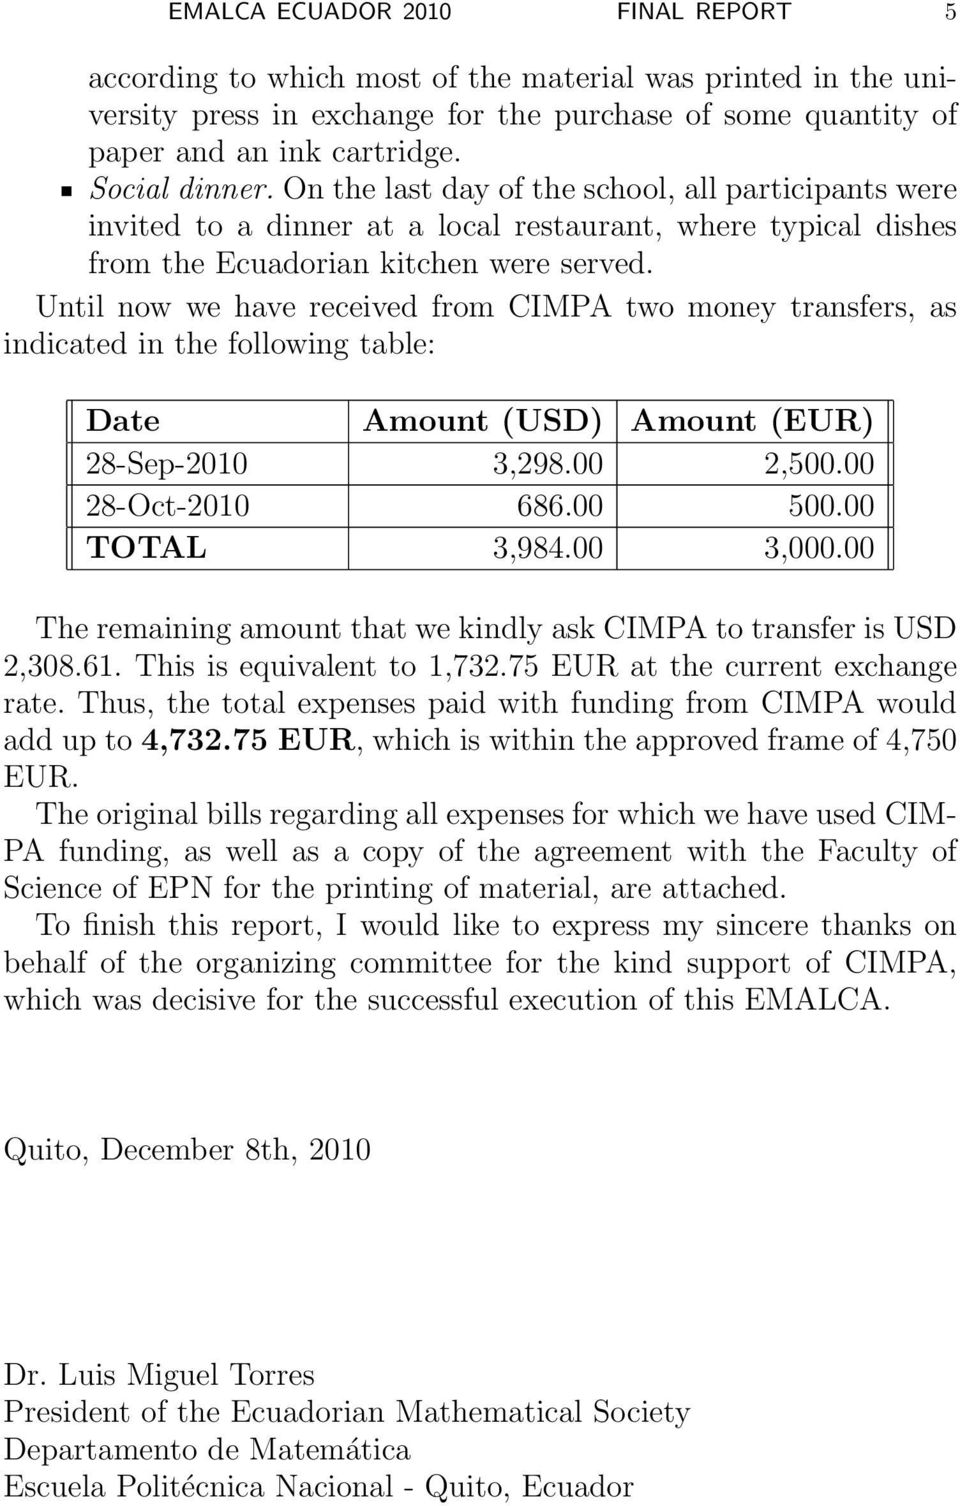 Until now we have received from CIMPA two money transfers, as indicated in the following table: Date Amount (USD) Amount (EUR) 28-Sep-2010 3,298.00 2,500.00 28-Oct-2010 686.00 500.00 TOTAL 3,984.